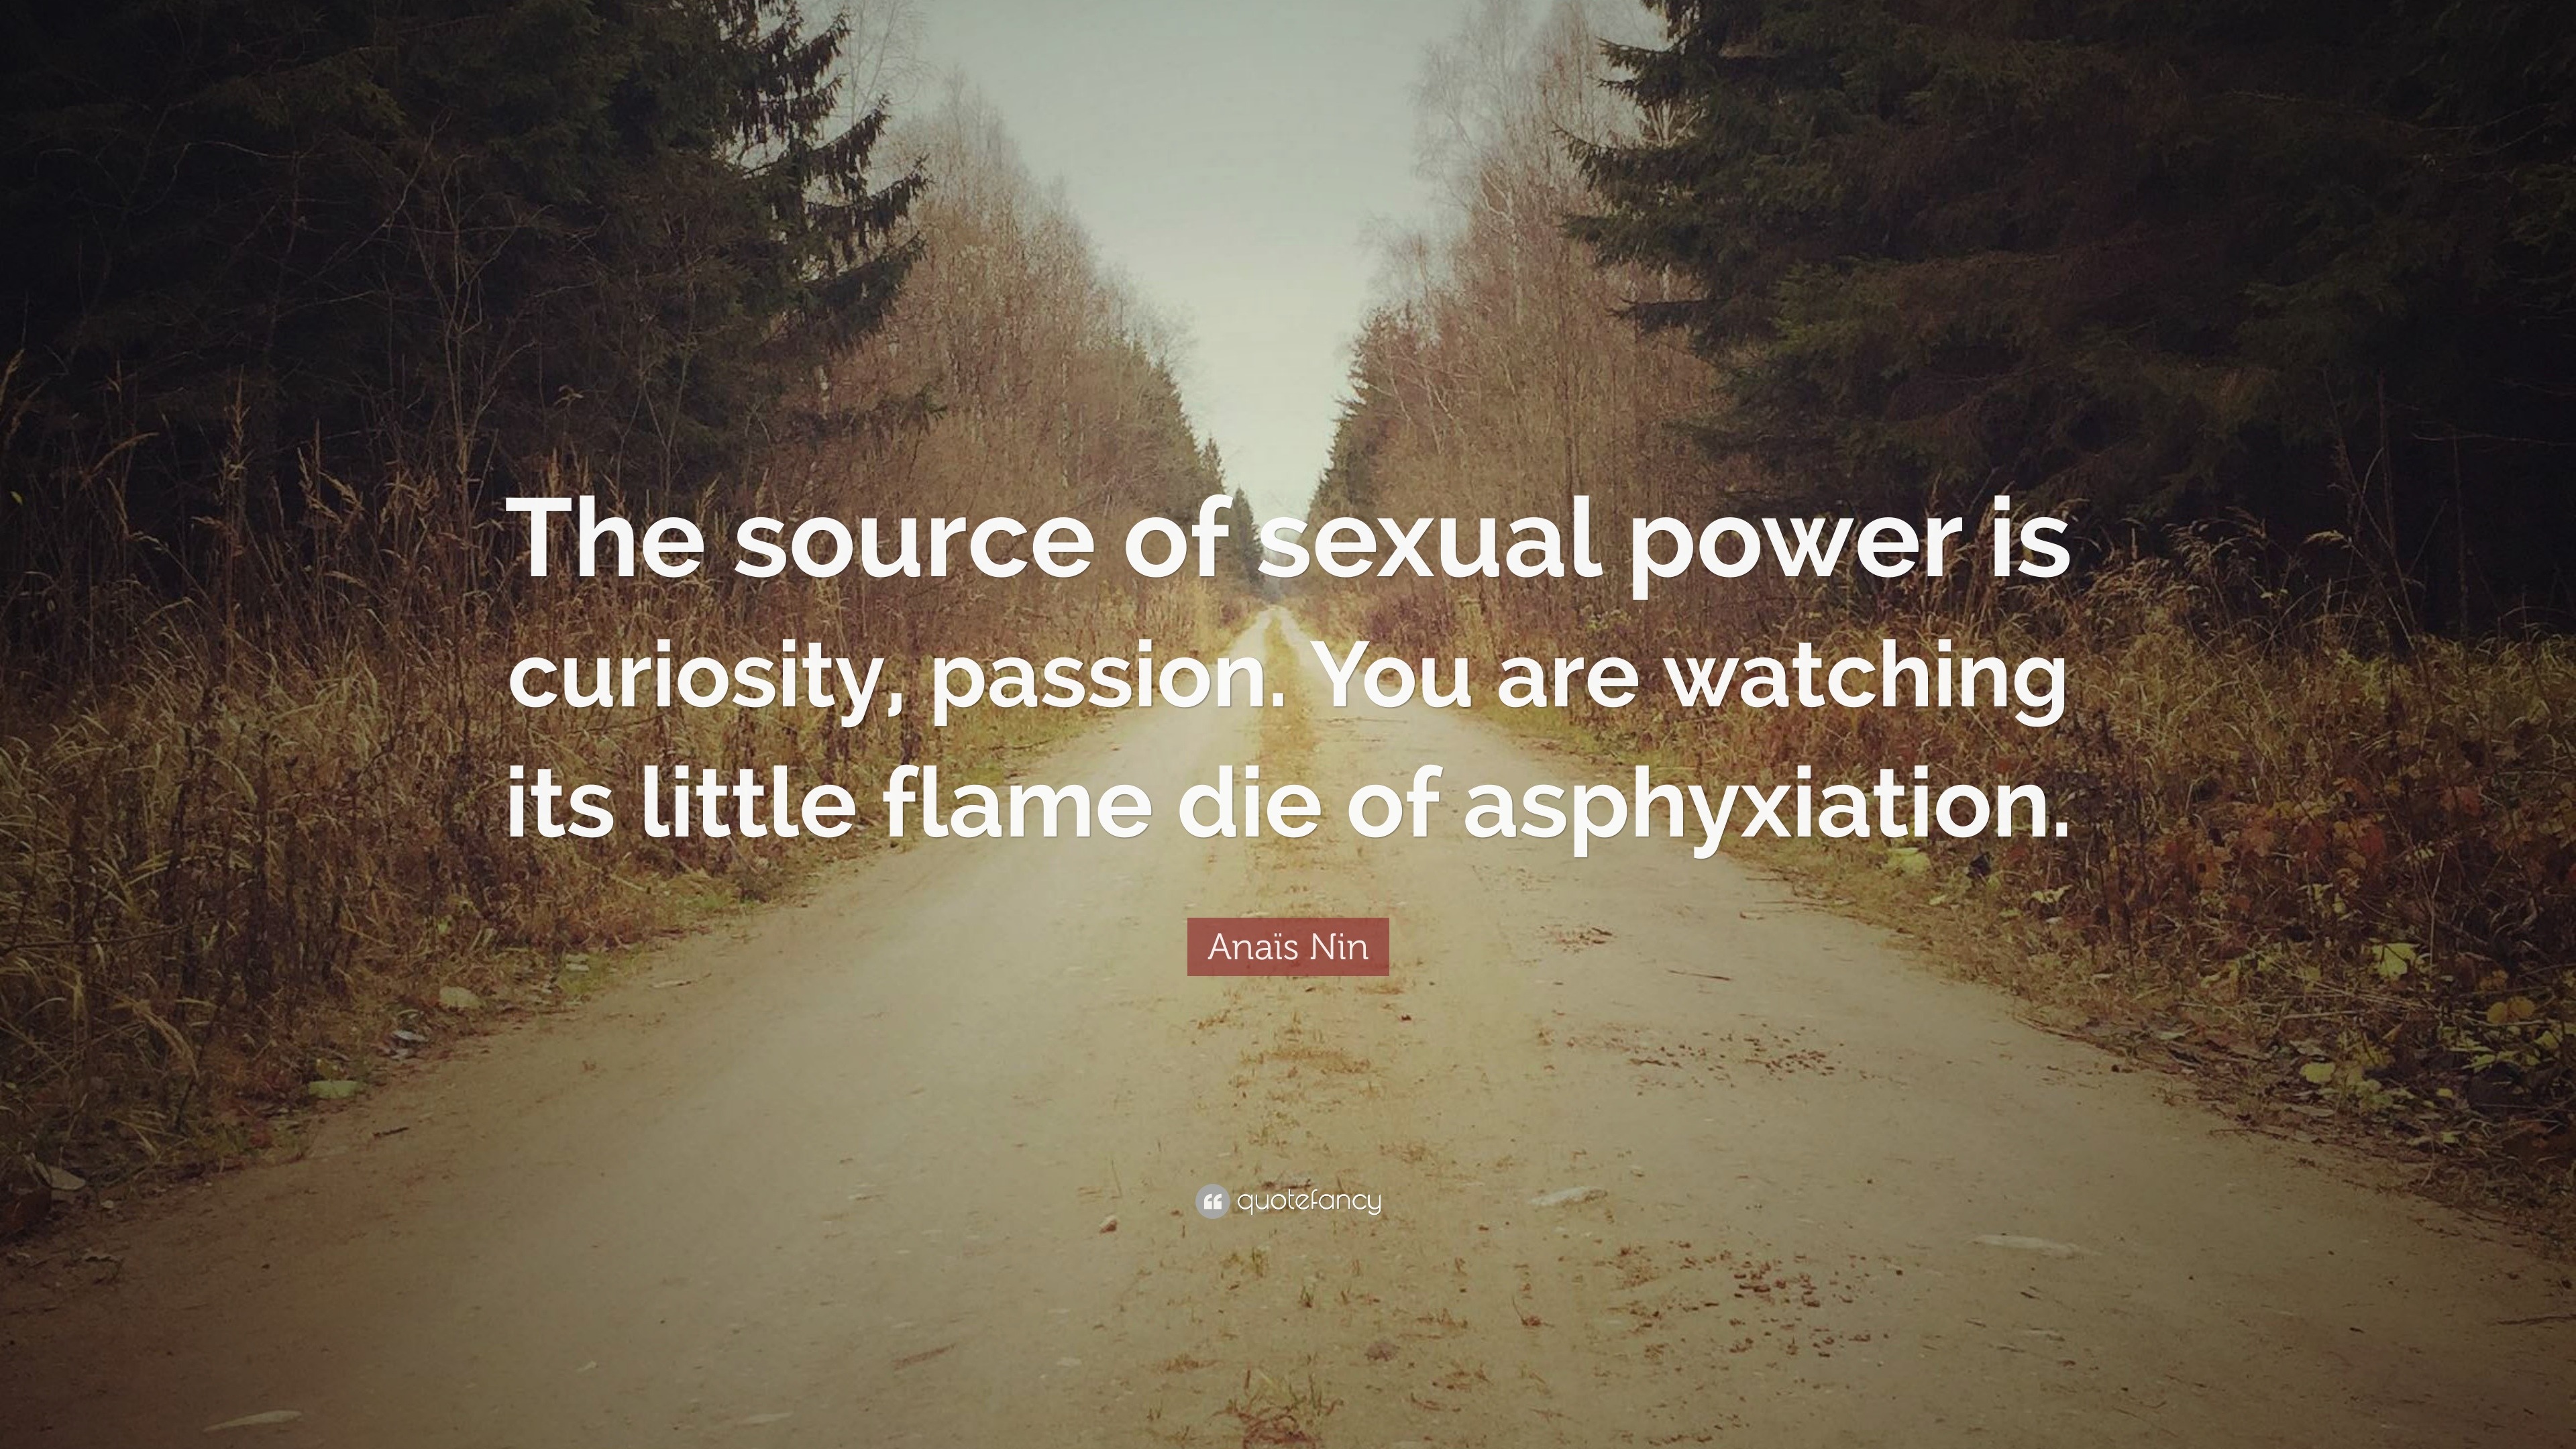 Anaïs Nin Quote “the Source Of Sexual Power Is Curiosity Passion You Are Watching Its Little